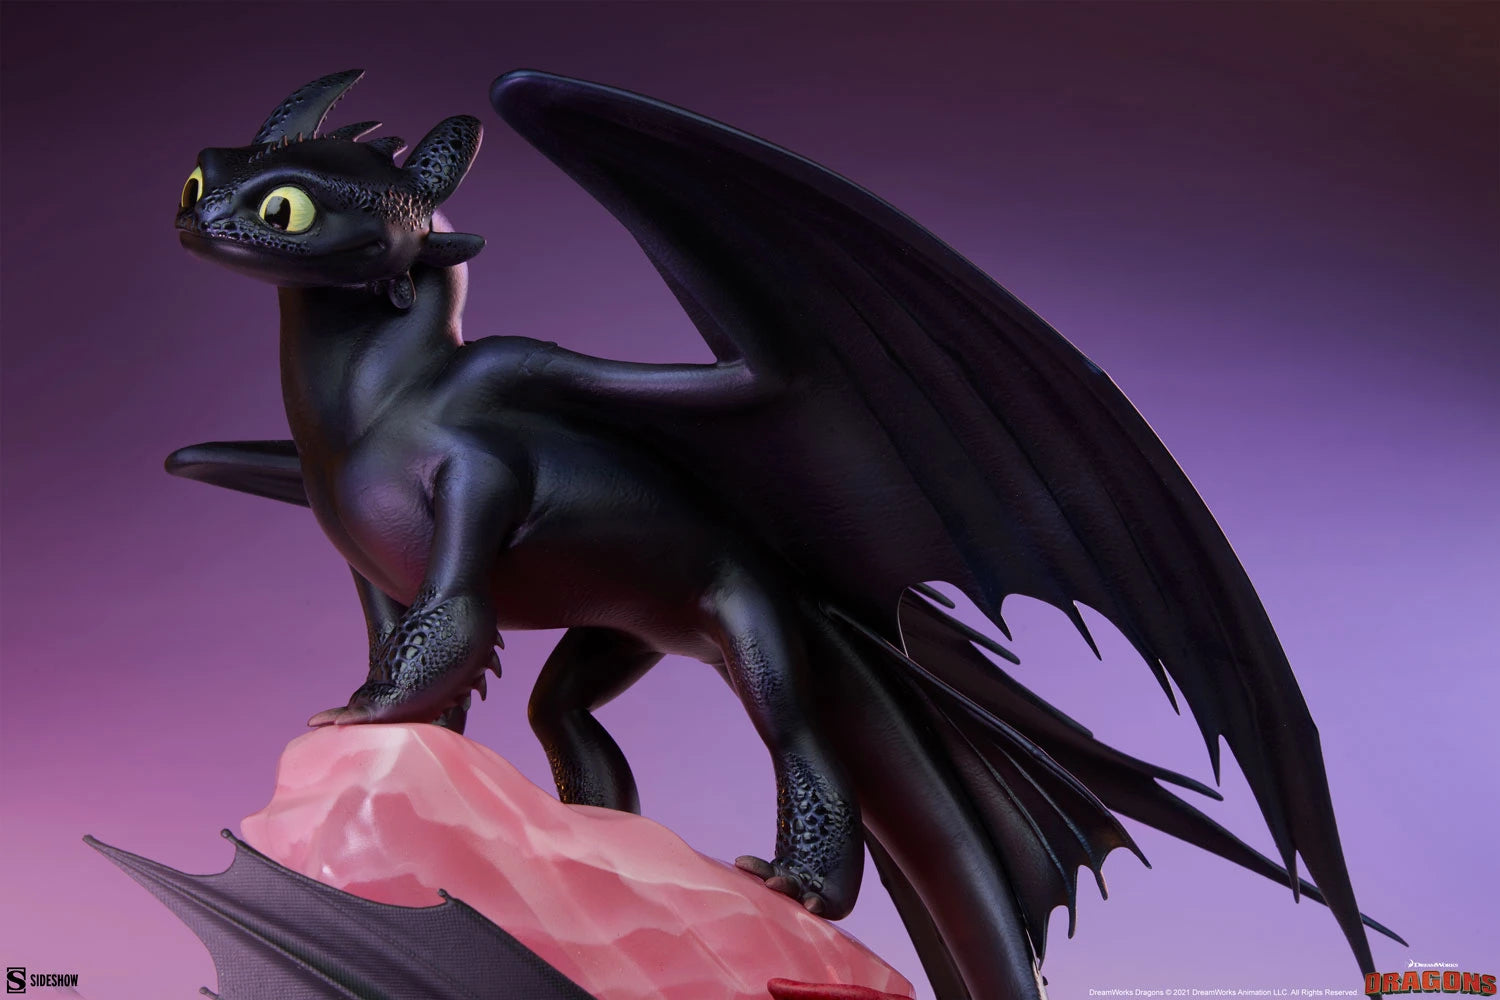 SIDESHOW HOW TO TRAIN YOUR DRAGON TOOTHLESS STATUE 200615 - Anotoys Collectibles